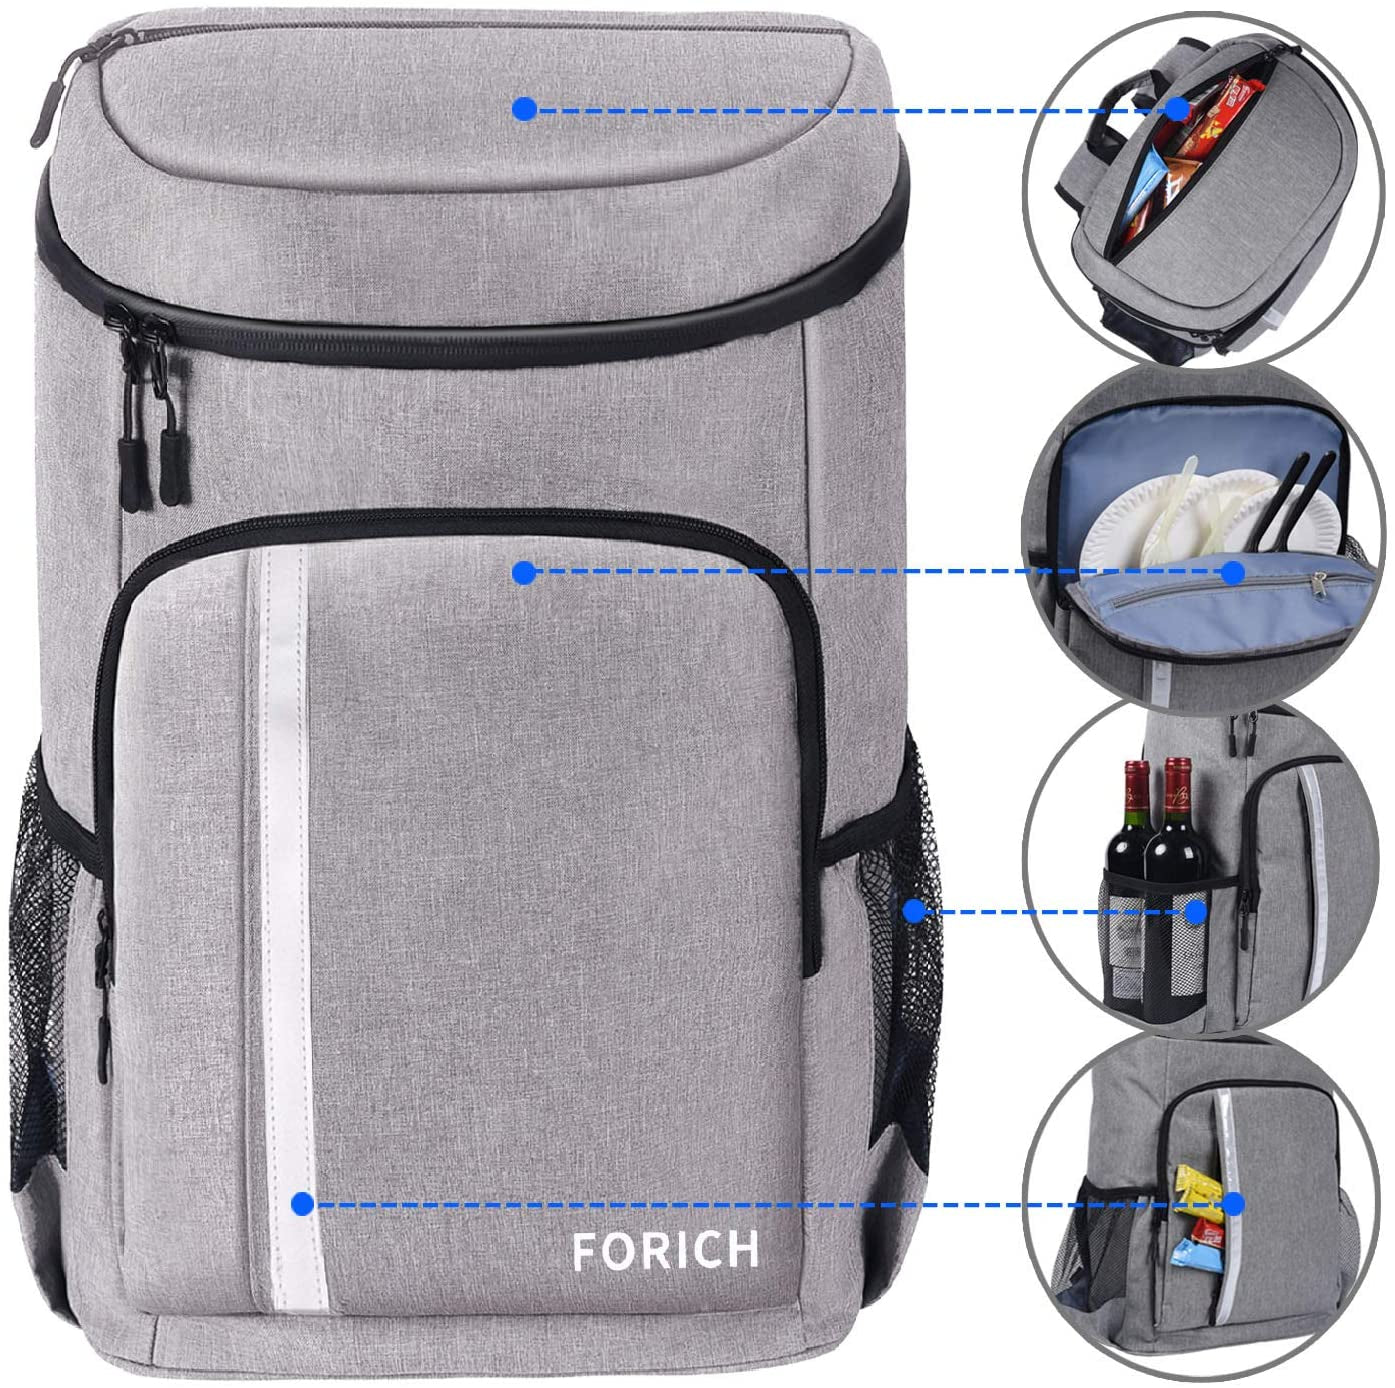 Backpack Cooler Leakproof Insulated Waterproof Backpack Cooler Bag, Lightweight Soft Beach Cooler Backpack for Men Women to Work Lunch Picnics Camping Hiking, 30 Cans